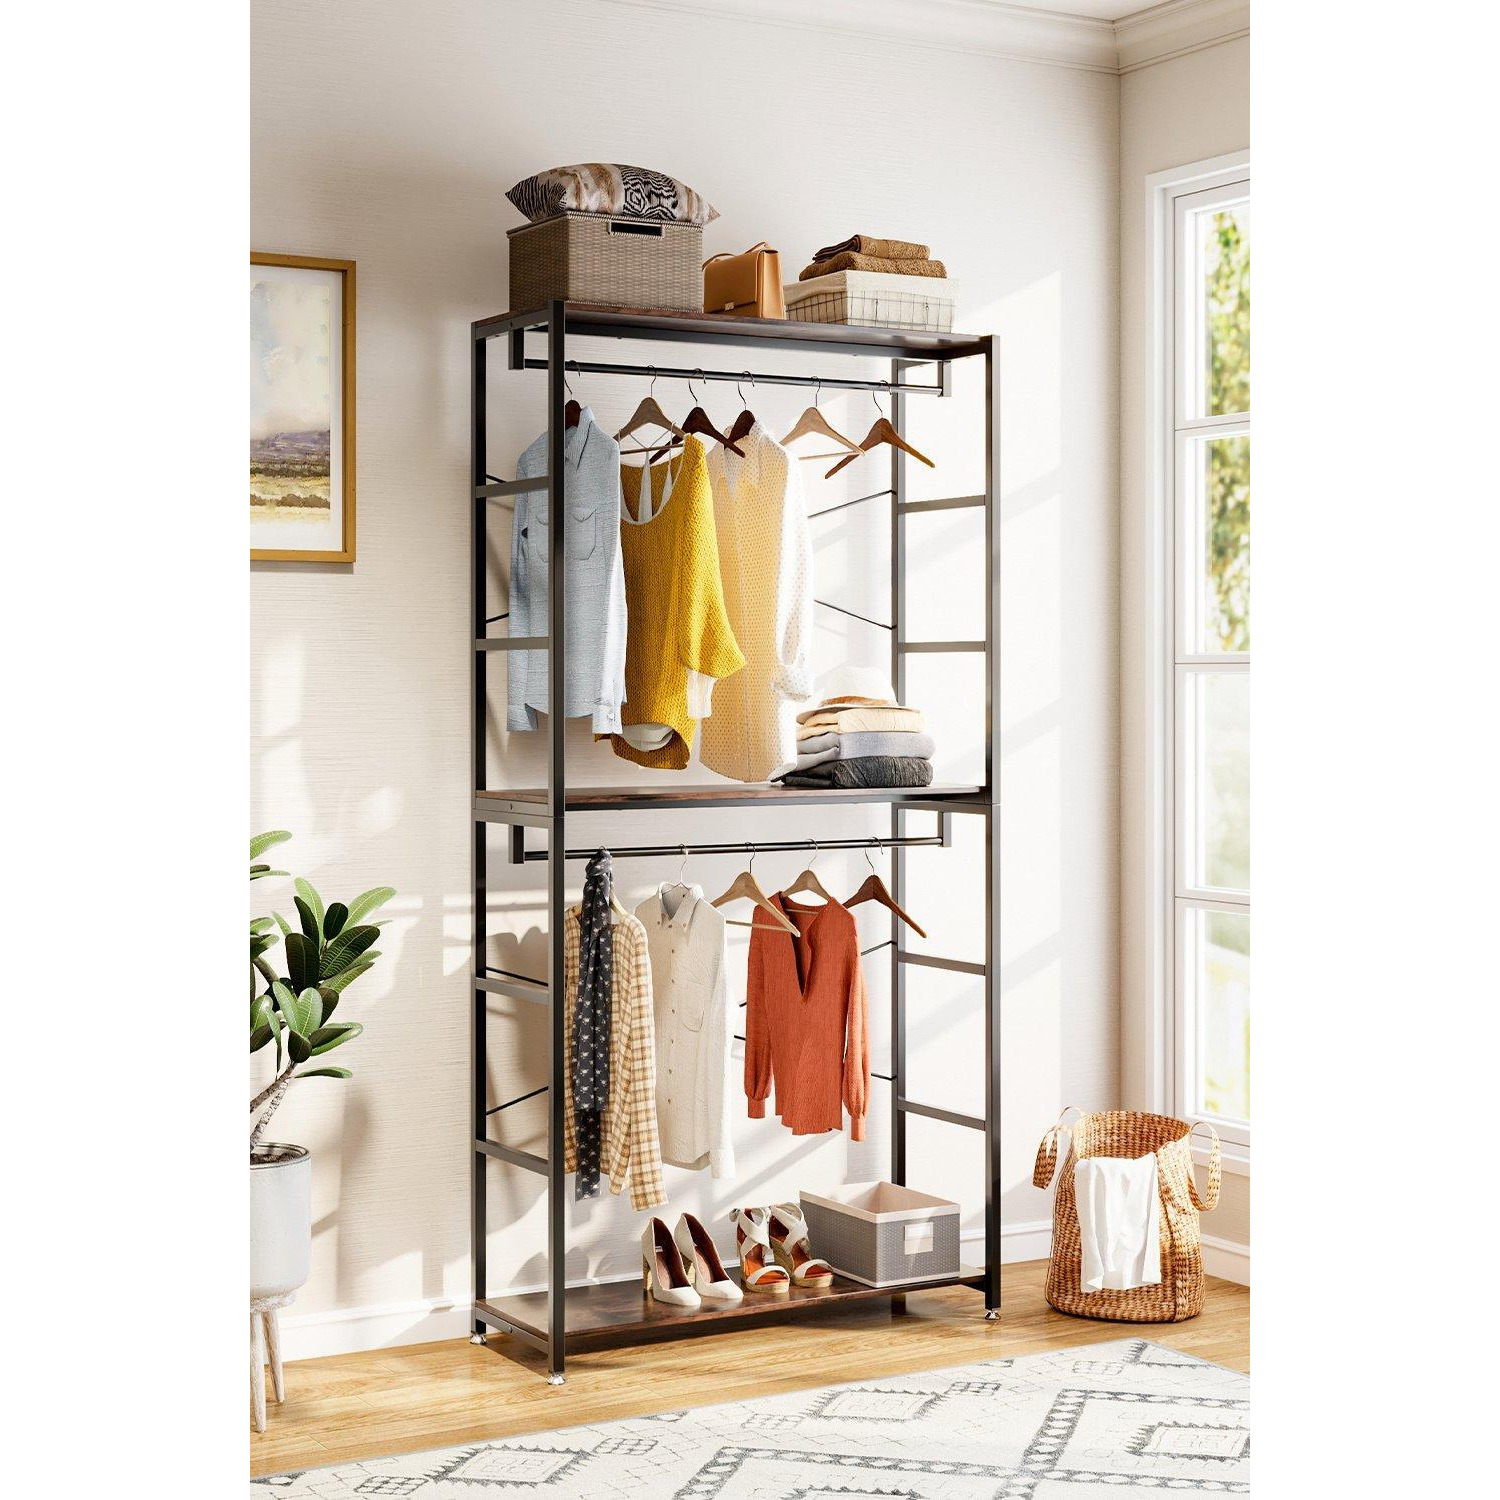 2 Tier Clothing Rack with Storage Shelves - image 1